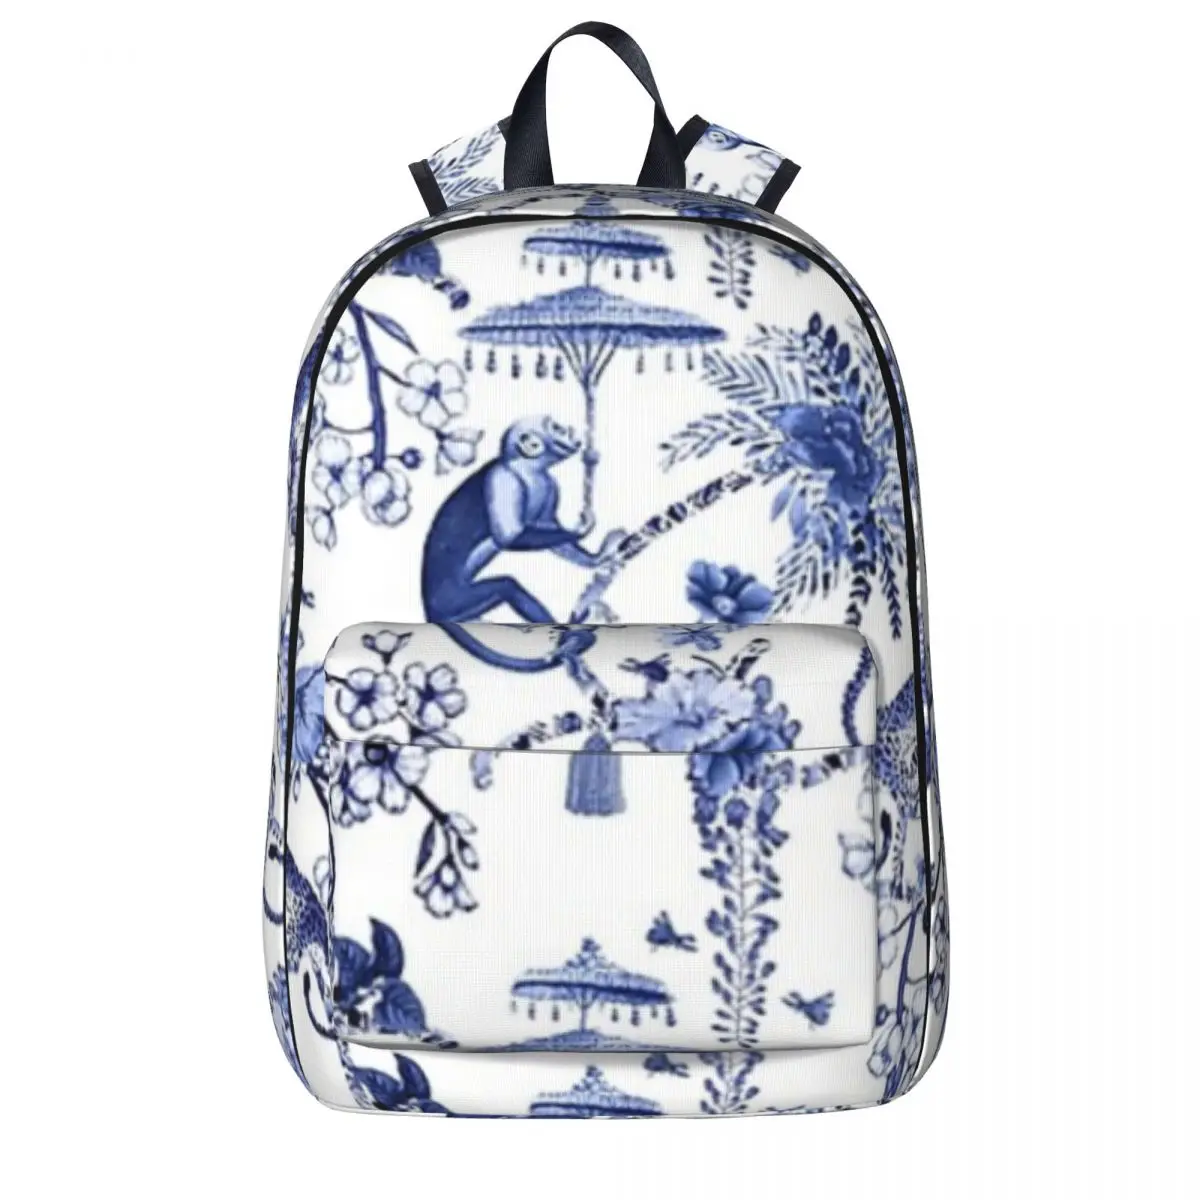 

Playful Menagerie Blue And White Chinoiseire Pattern Backpack Casual Student School Bag Laptop Rucksack Travel Rucksack Bookbag